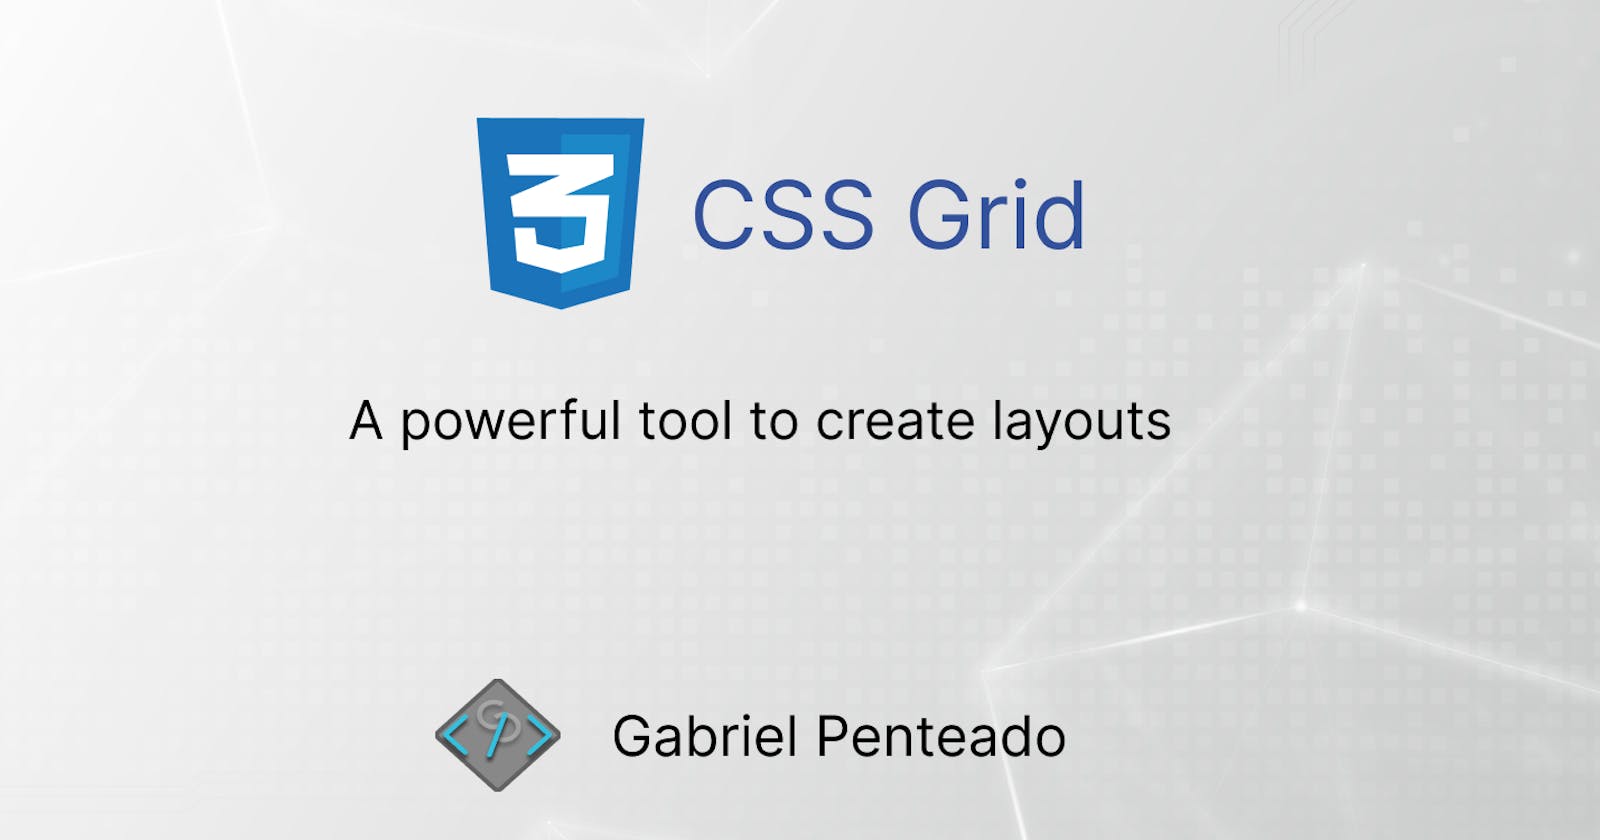 The power of CSS Grid to create layouts